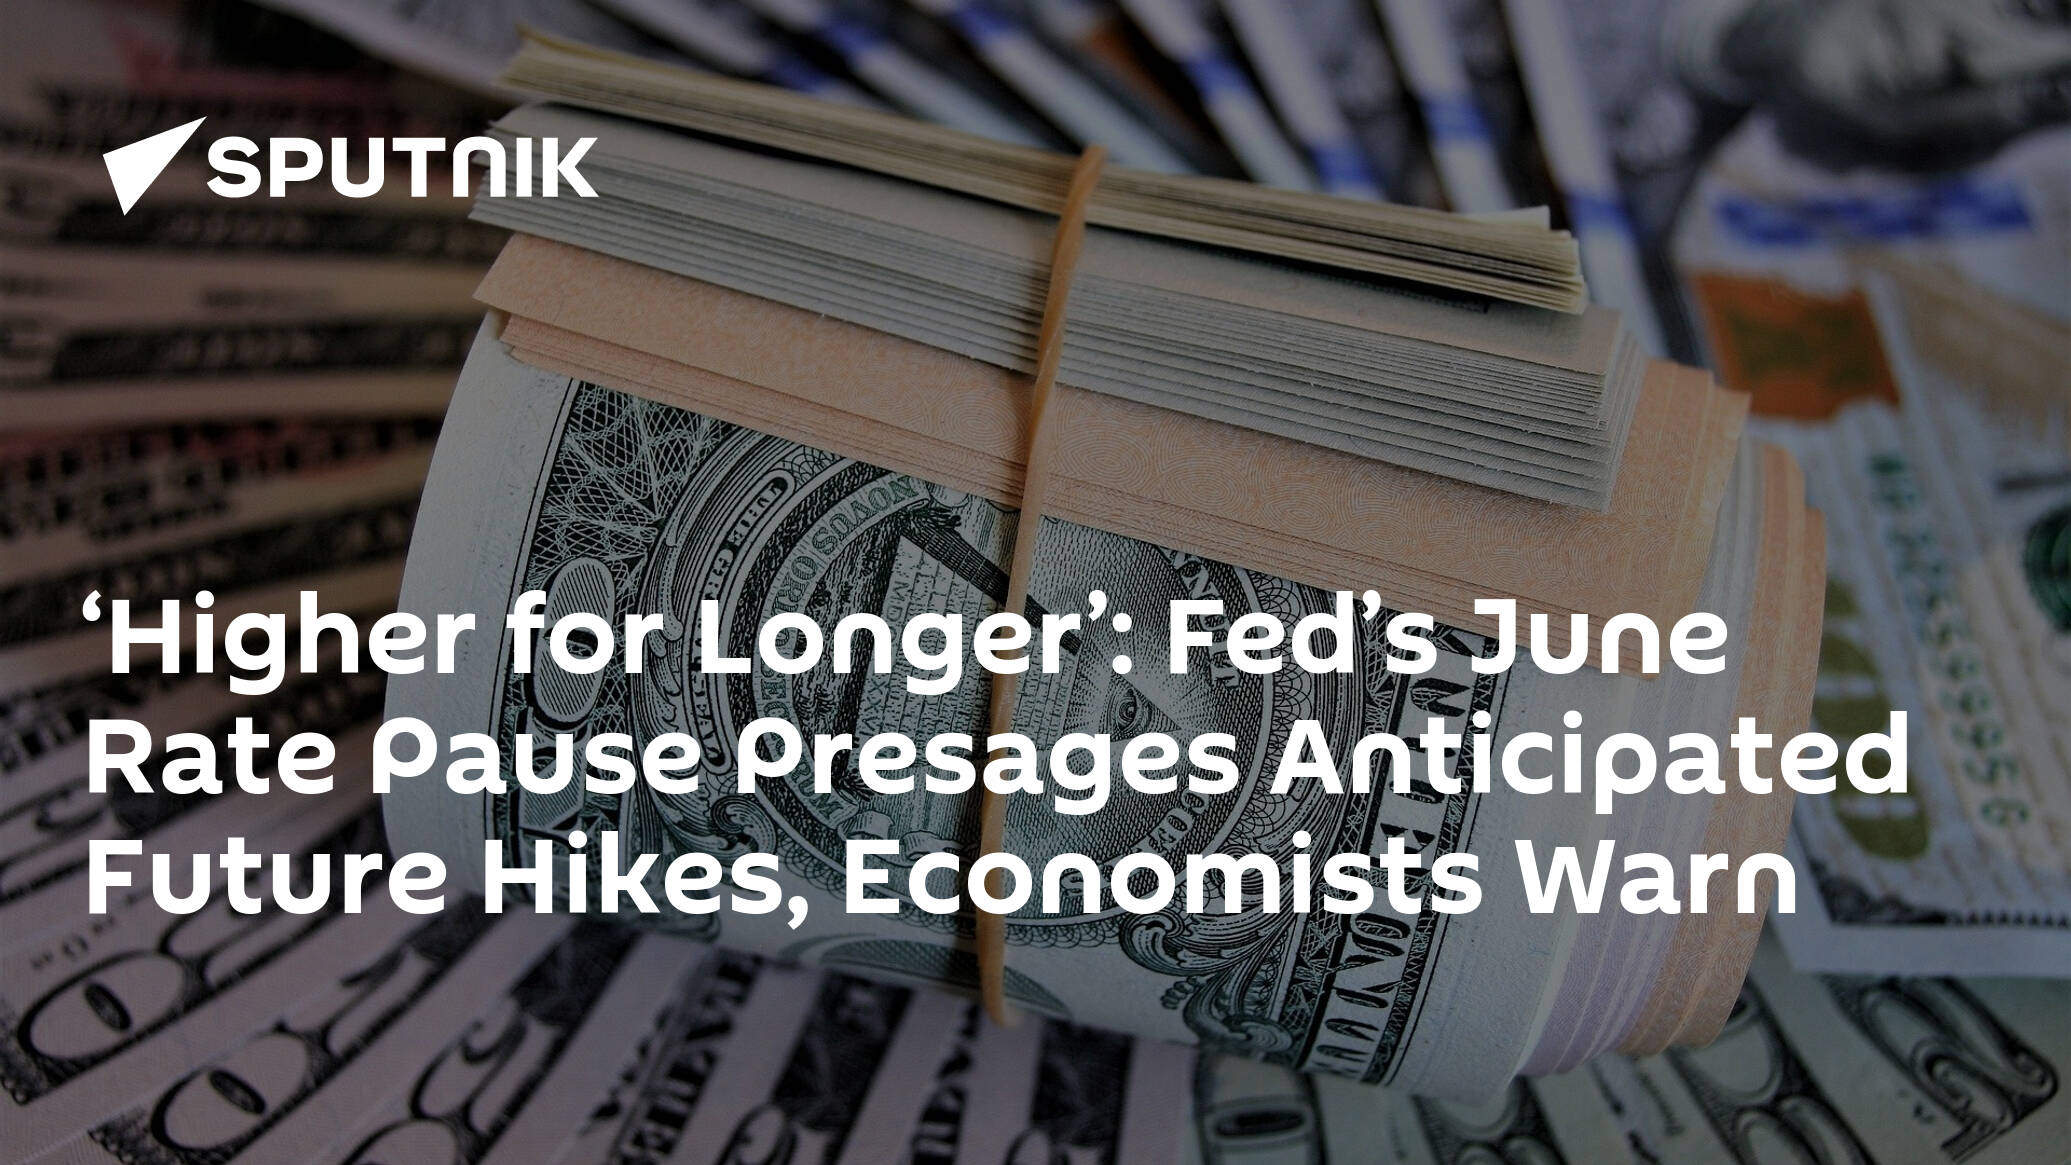 ‘Higher for Longer’: Fed’s June Rate Pause Presages Anticipated Future Hikes, Economists Warn